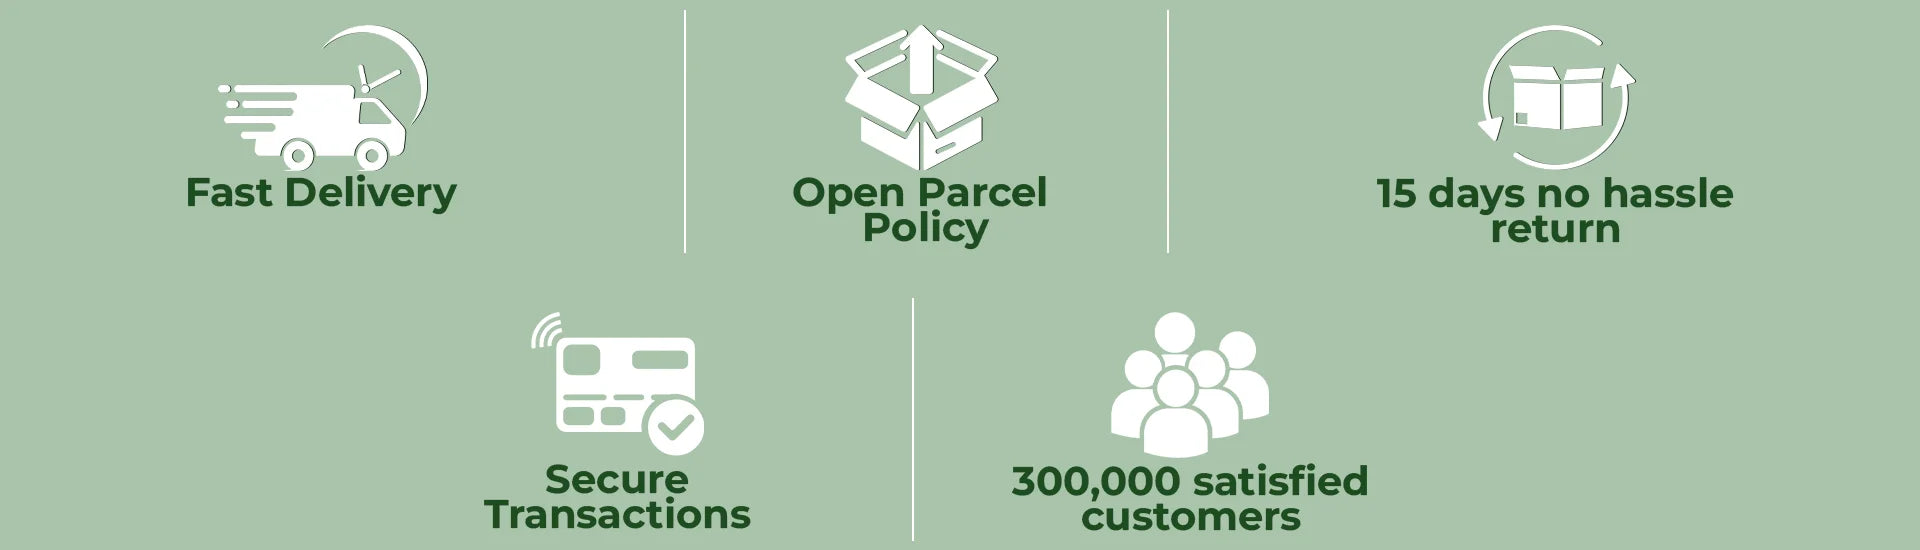 Fast Delivery | Open Parcel Policy | Secure Transactions | 300k+ Satisfied Customers | 15 Days No Hassle Return